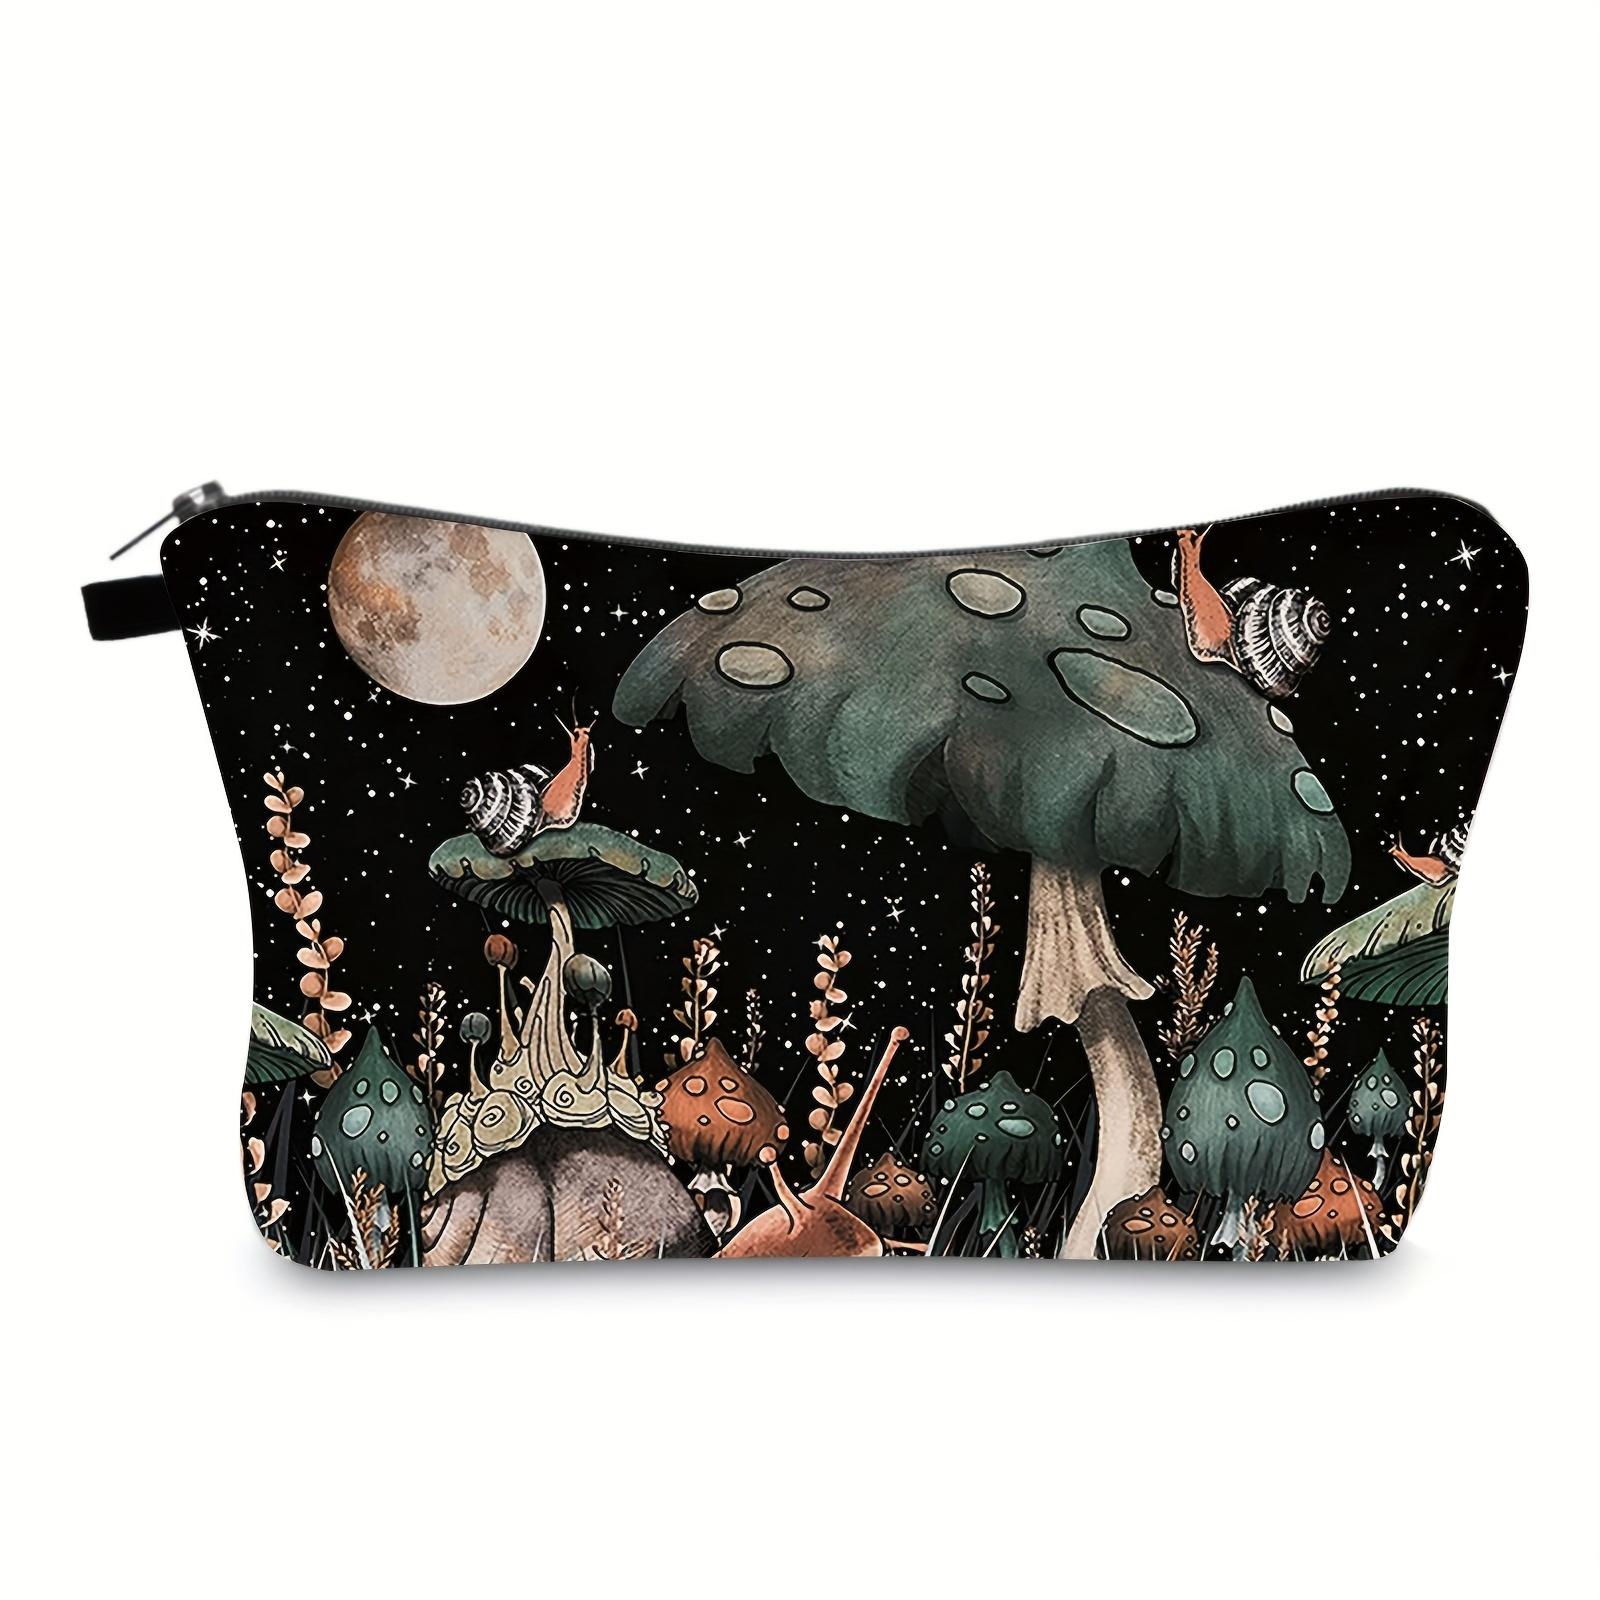 

Waterproof Mushroom Print Makeup Bag - Portable Cosmetic Case For Travel And Toiletry Storage - Washable And Reusable - Perfect For Women (black Night)